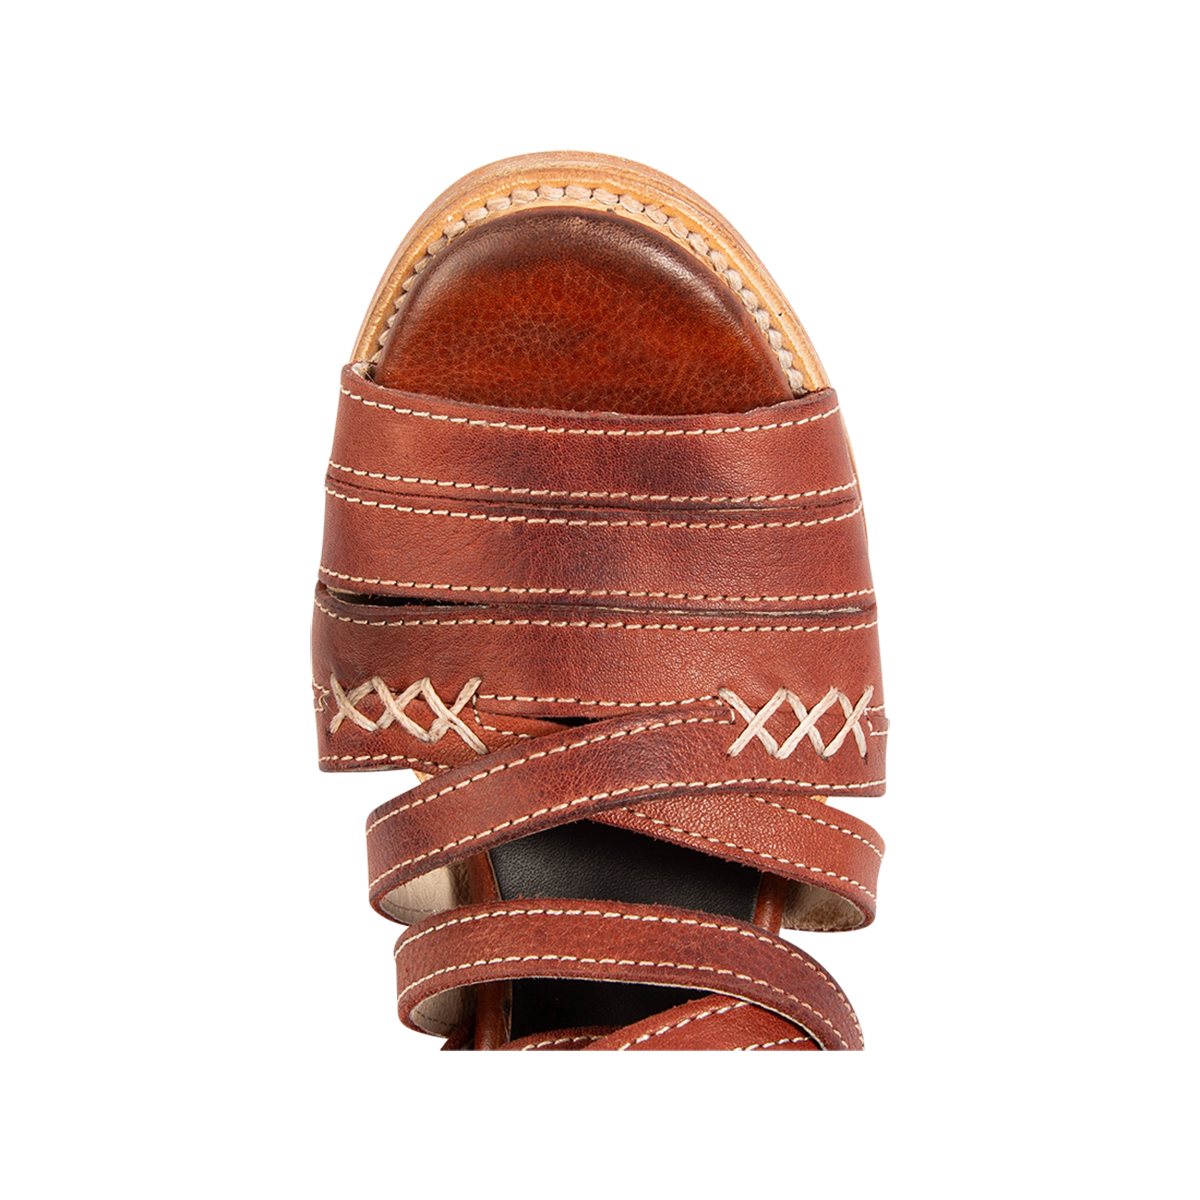 Top view showing a rounded toe and leather straps on FREEBIRD women's Makayla rust leather sandal